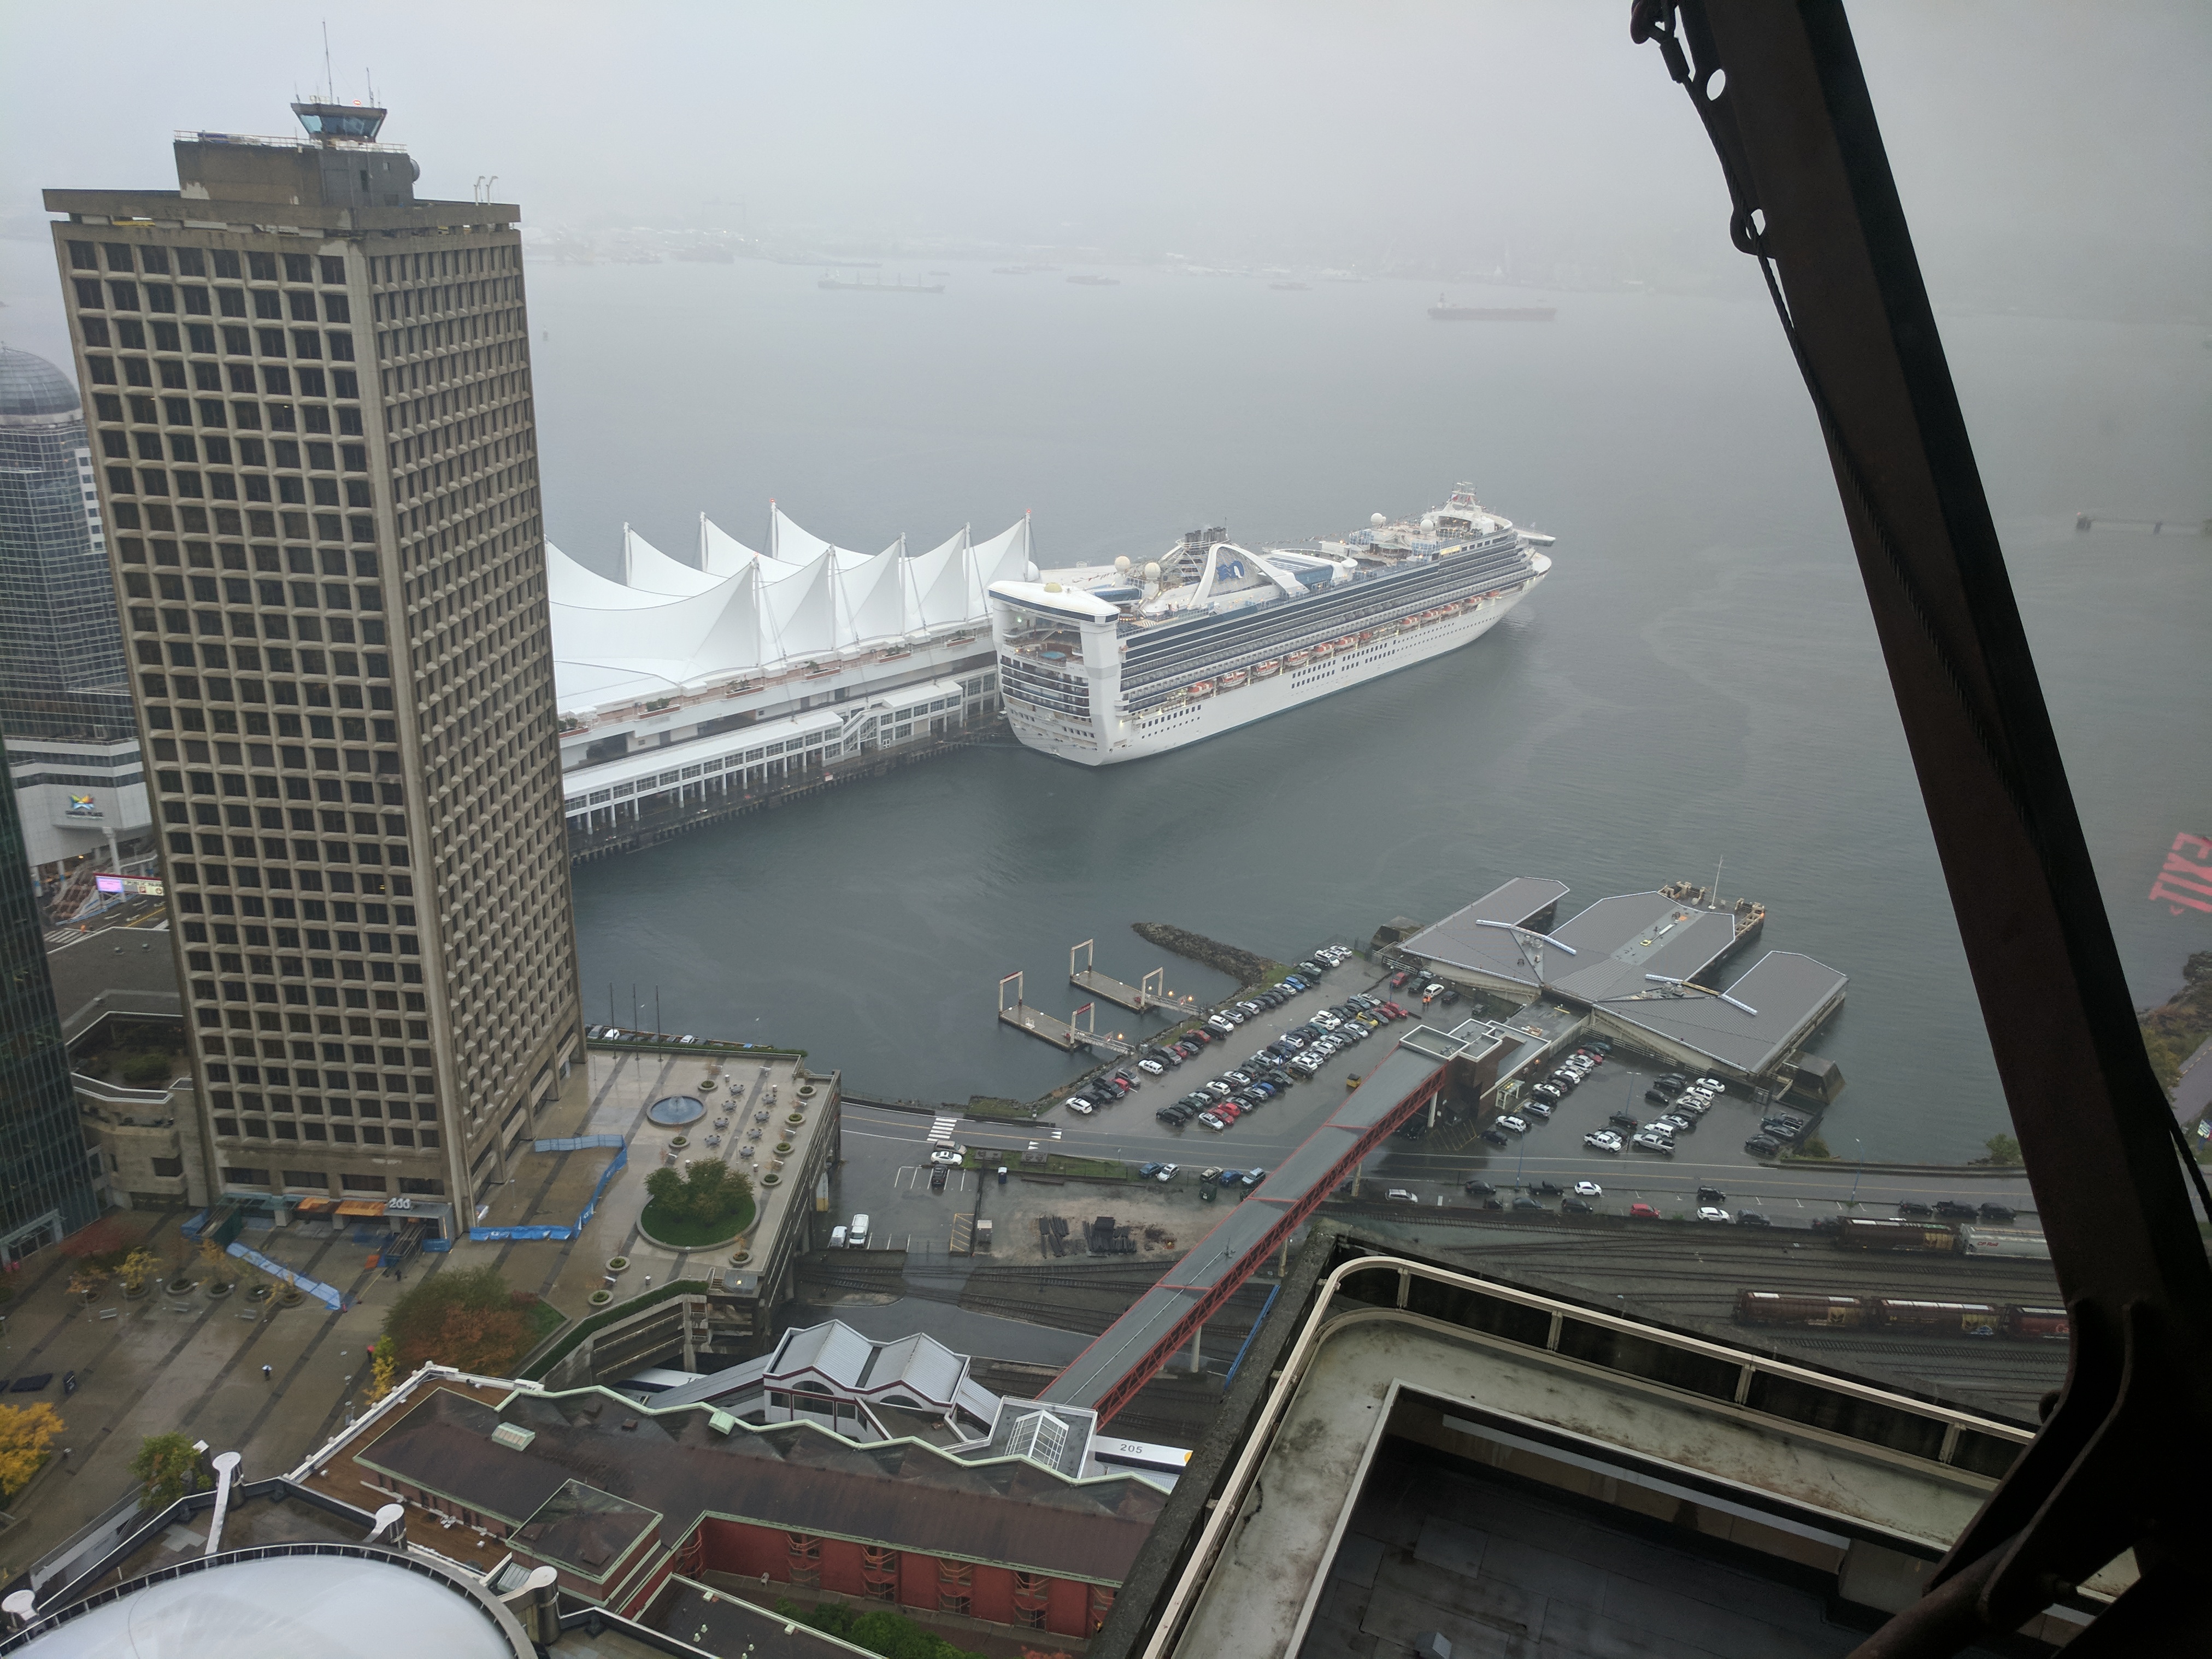 Looking down from an observation tower at a large cruise ship. It's miserable weather.